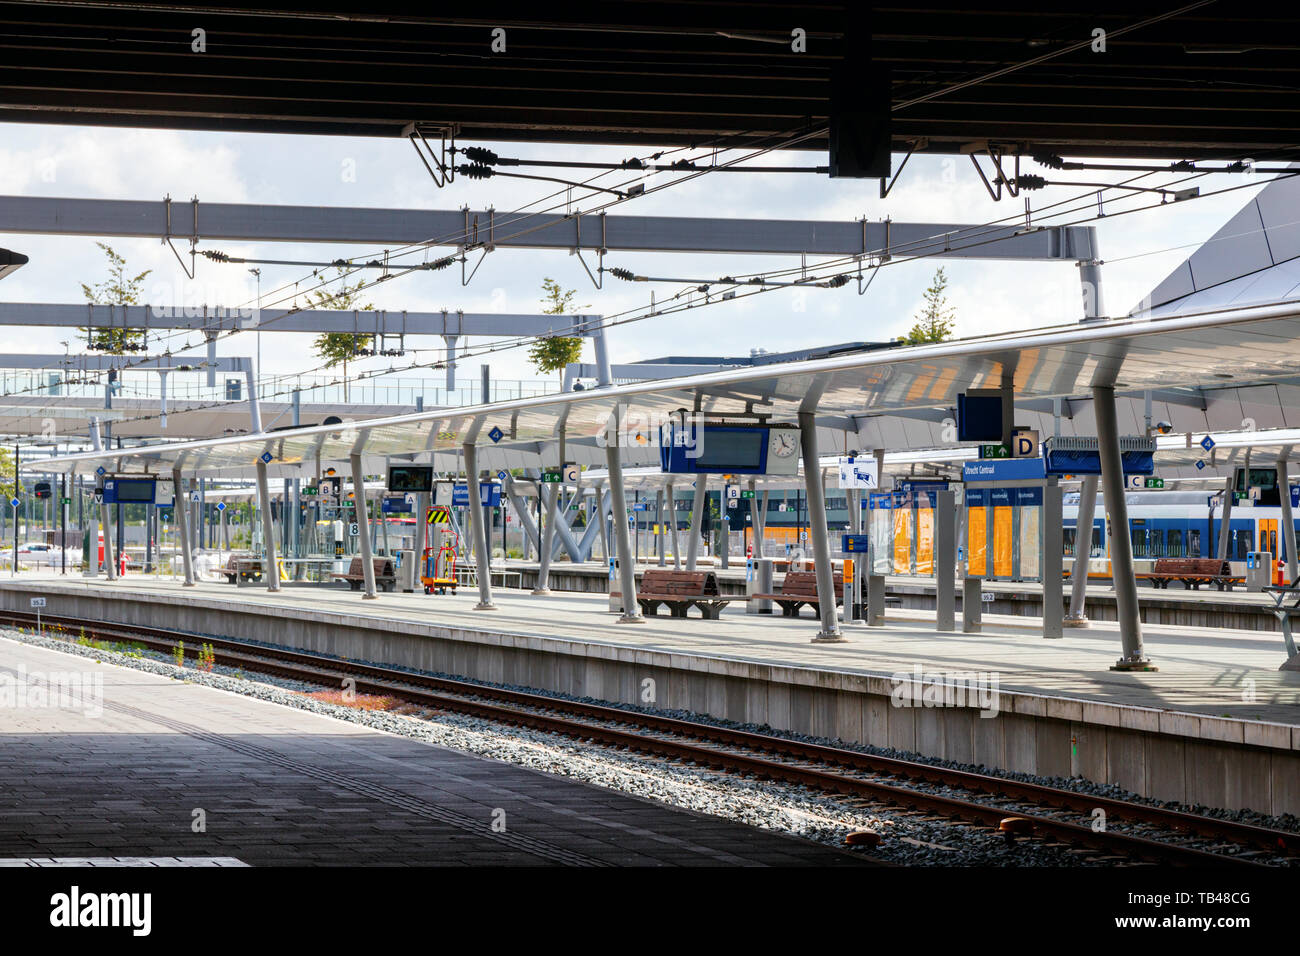 Desolate platforms at Utrecht Centraal station. Due to a national strike in public transport, all train travel is cancelled. Utrecht, The Netherlands. Stock Photo